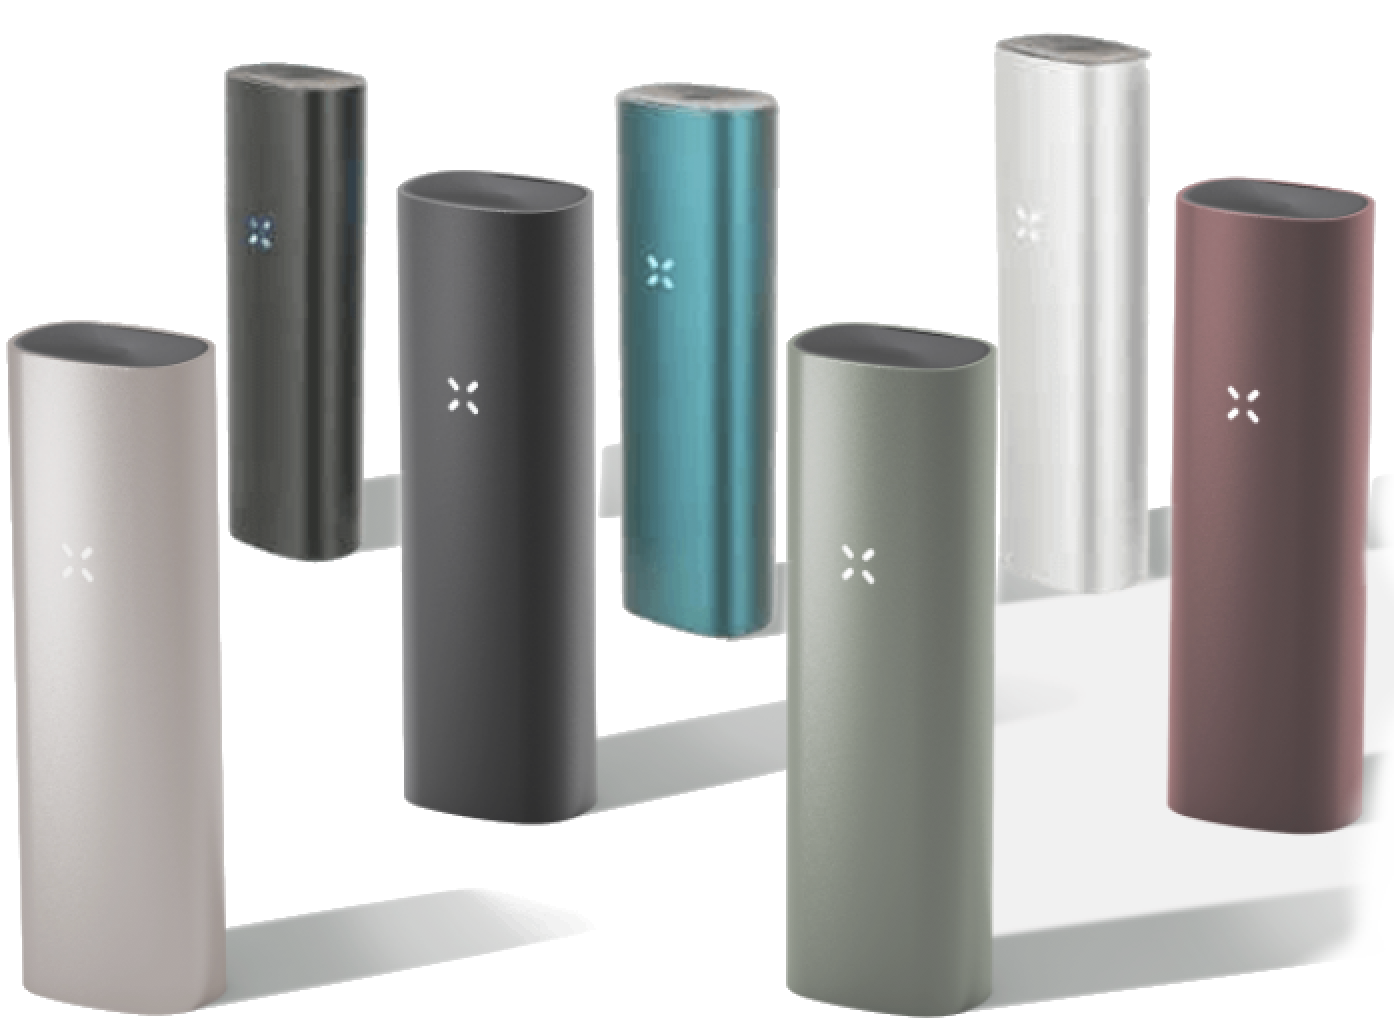 pax 3 device only dry herb